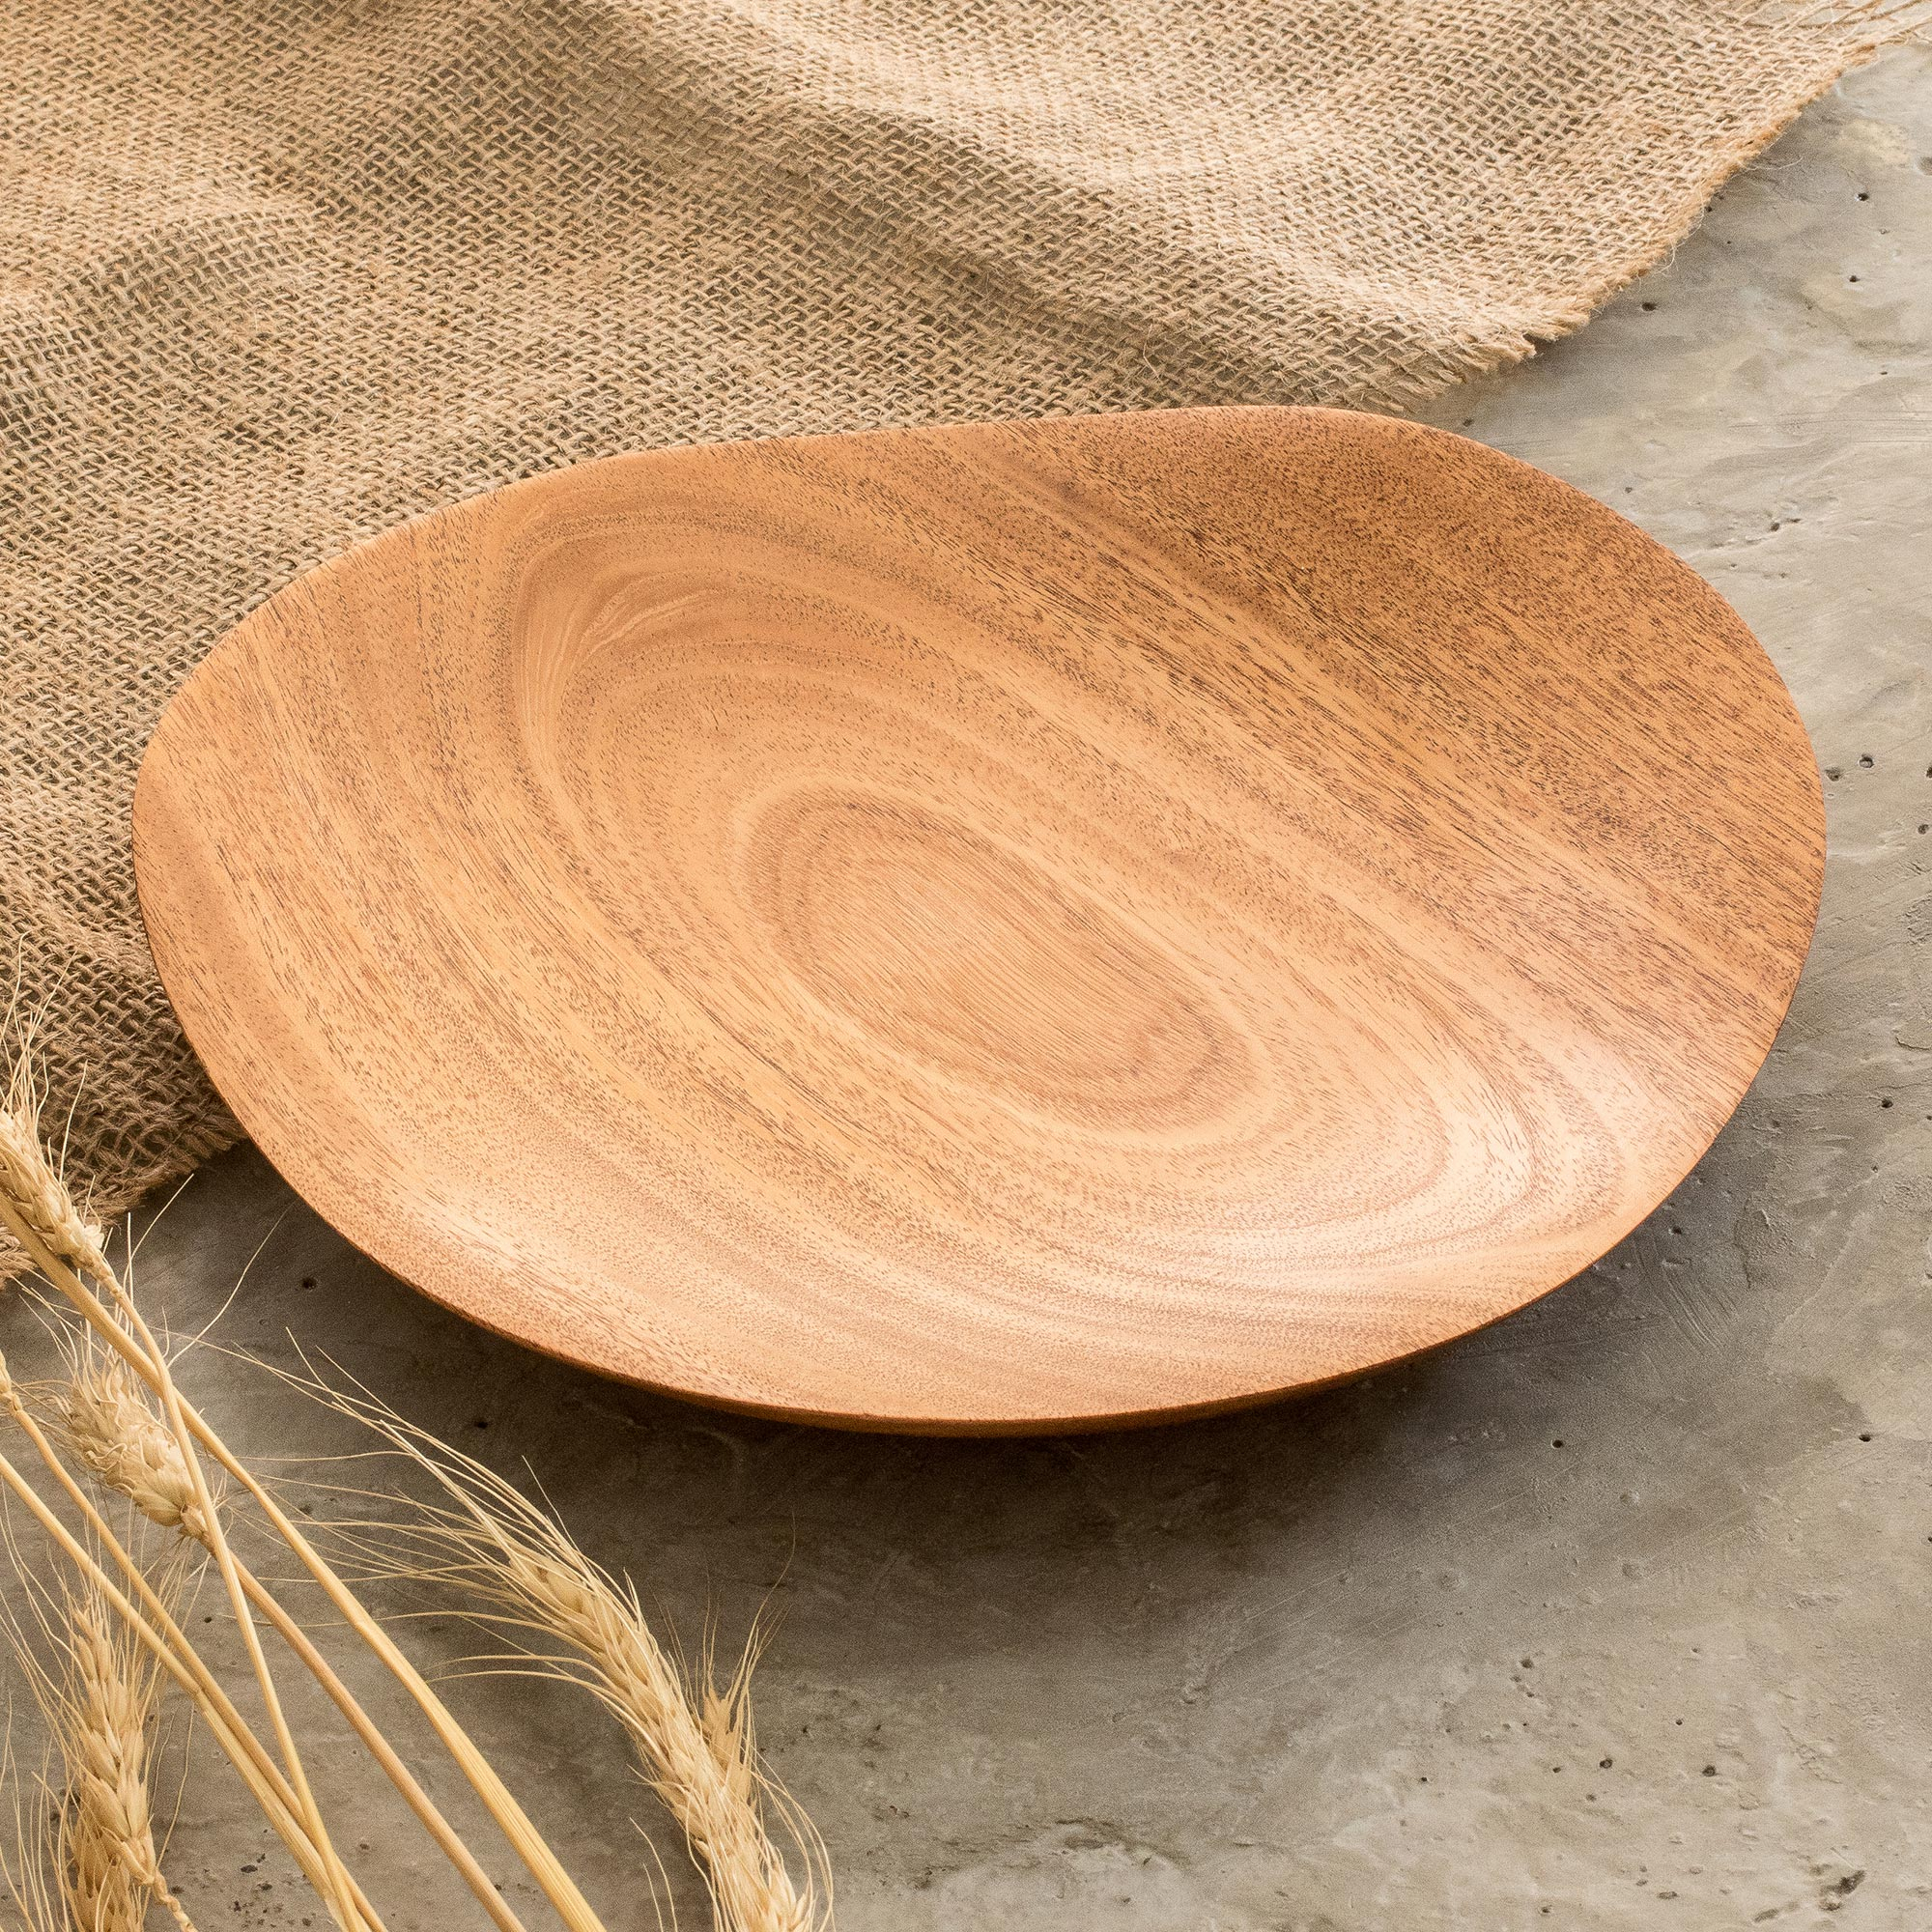 Hand Carved Round Conacaste Wood Tray from Guatemala - Natural Circle